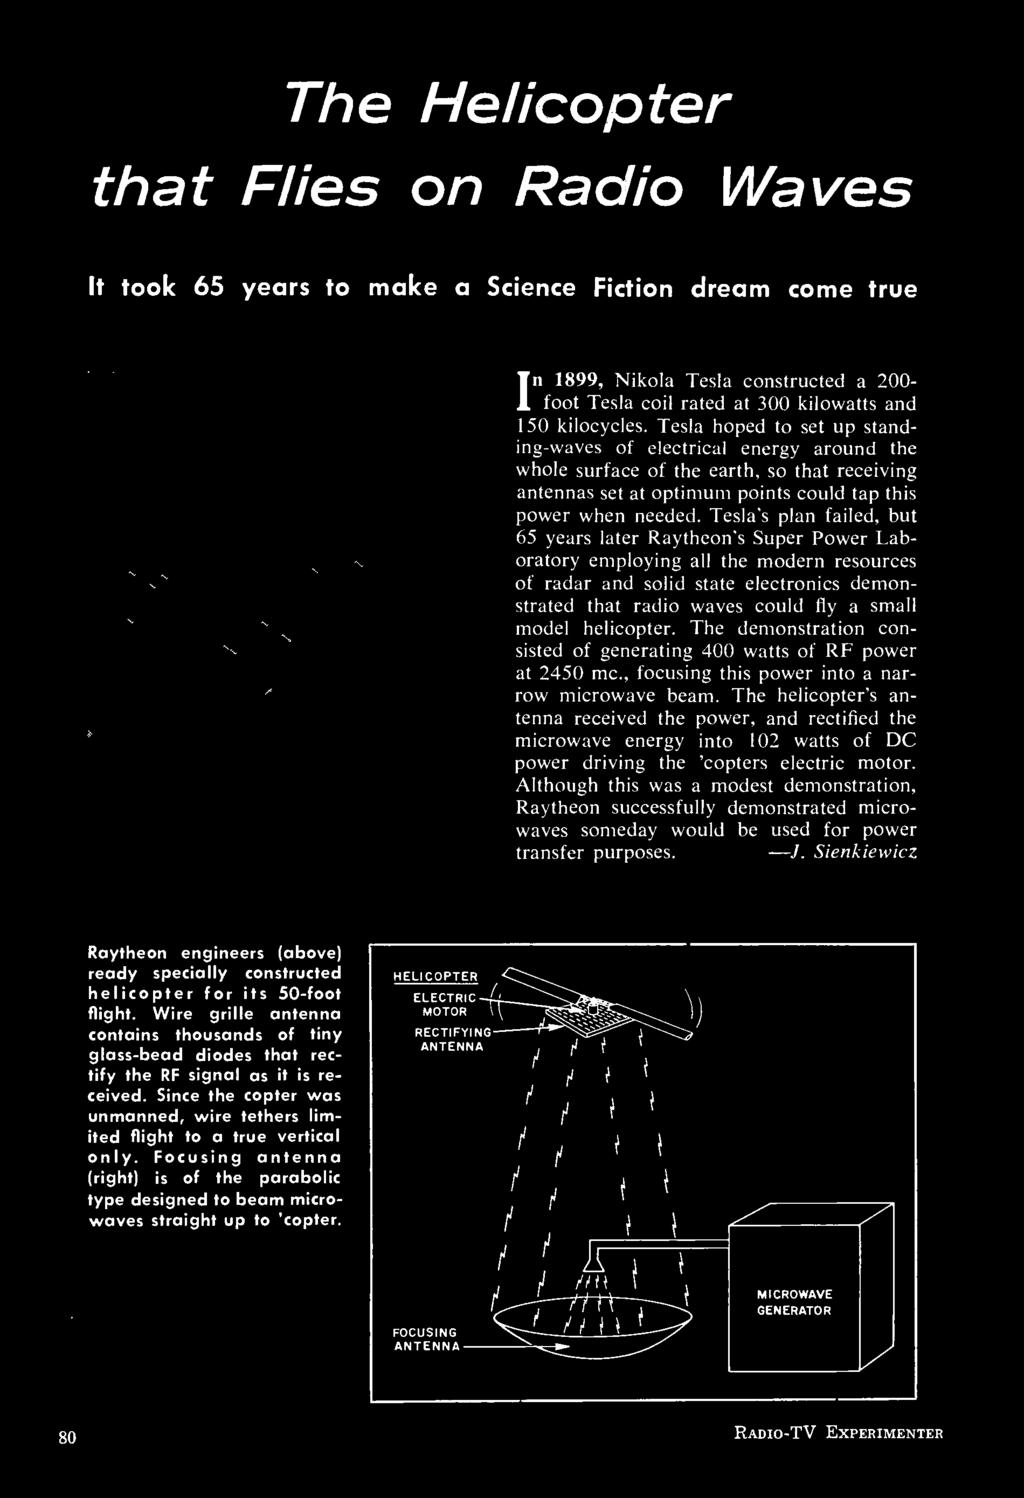 Tesla's plan failed, but 65 years later Raytheon's Super Power Laboratory employing all the modern resources of radar and solid state electronics demonstrated that radio waves could fly a small model